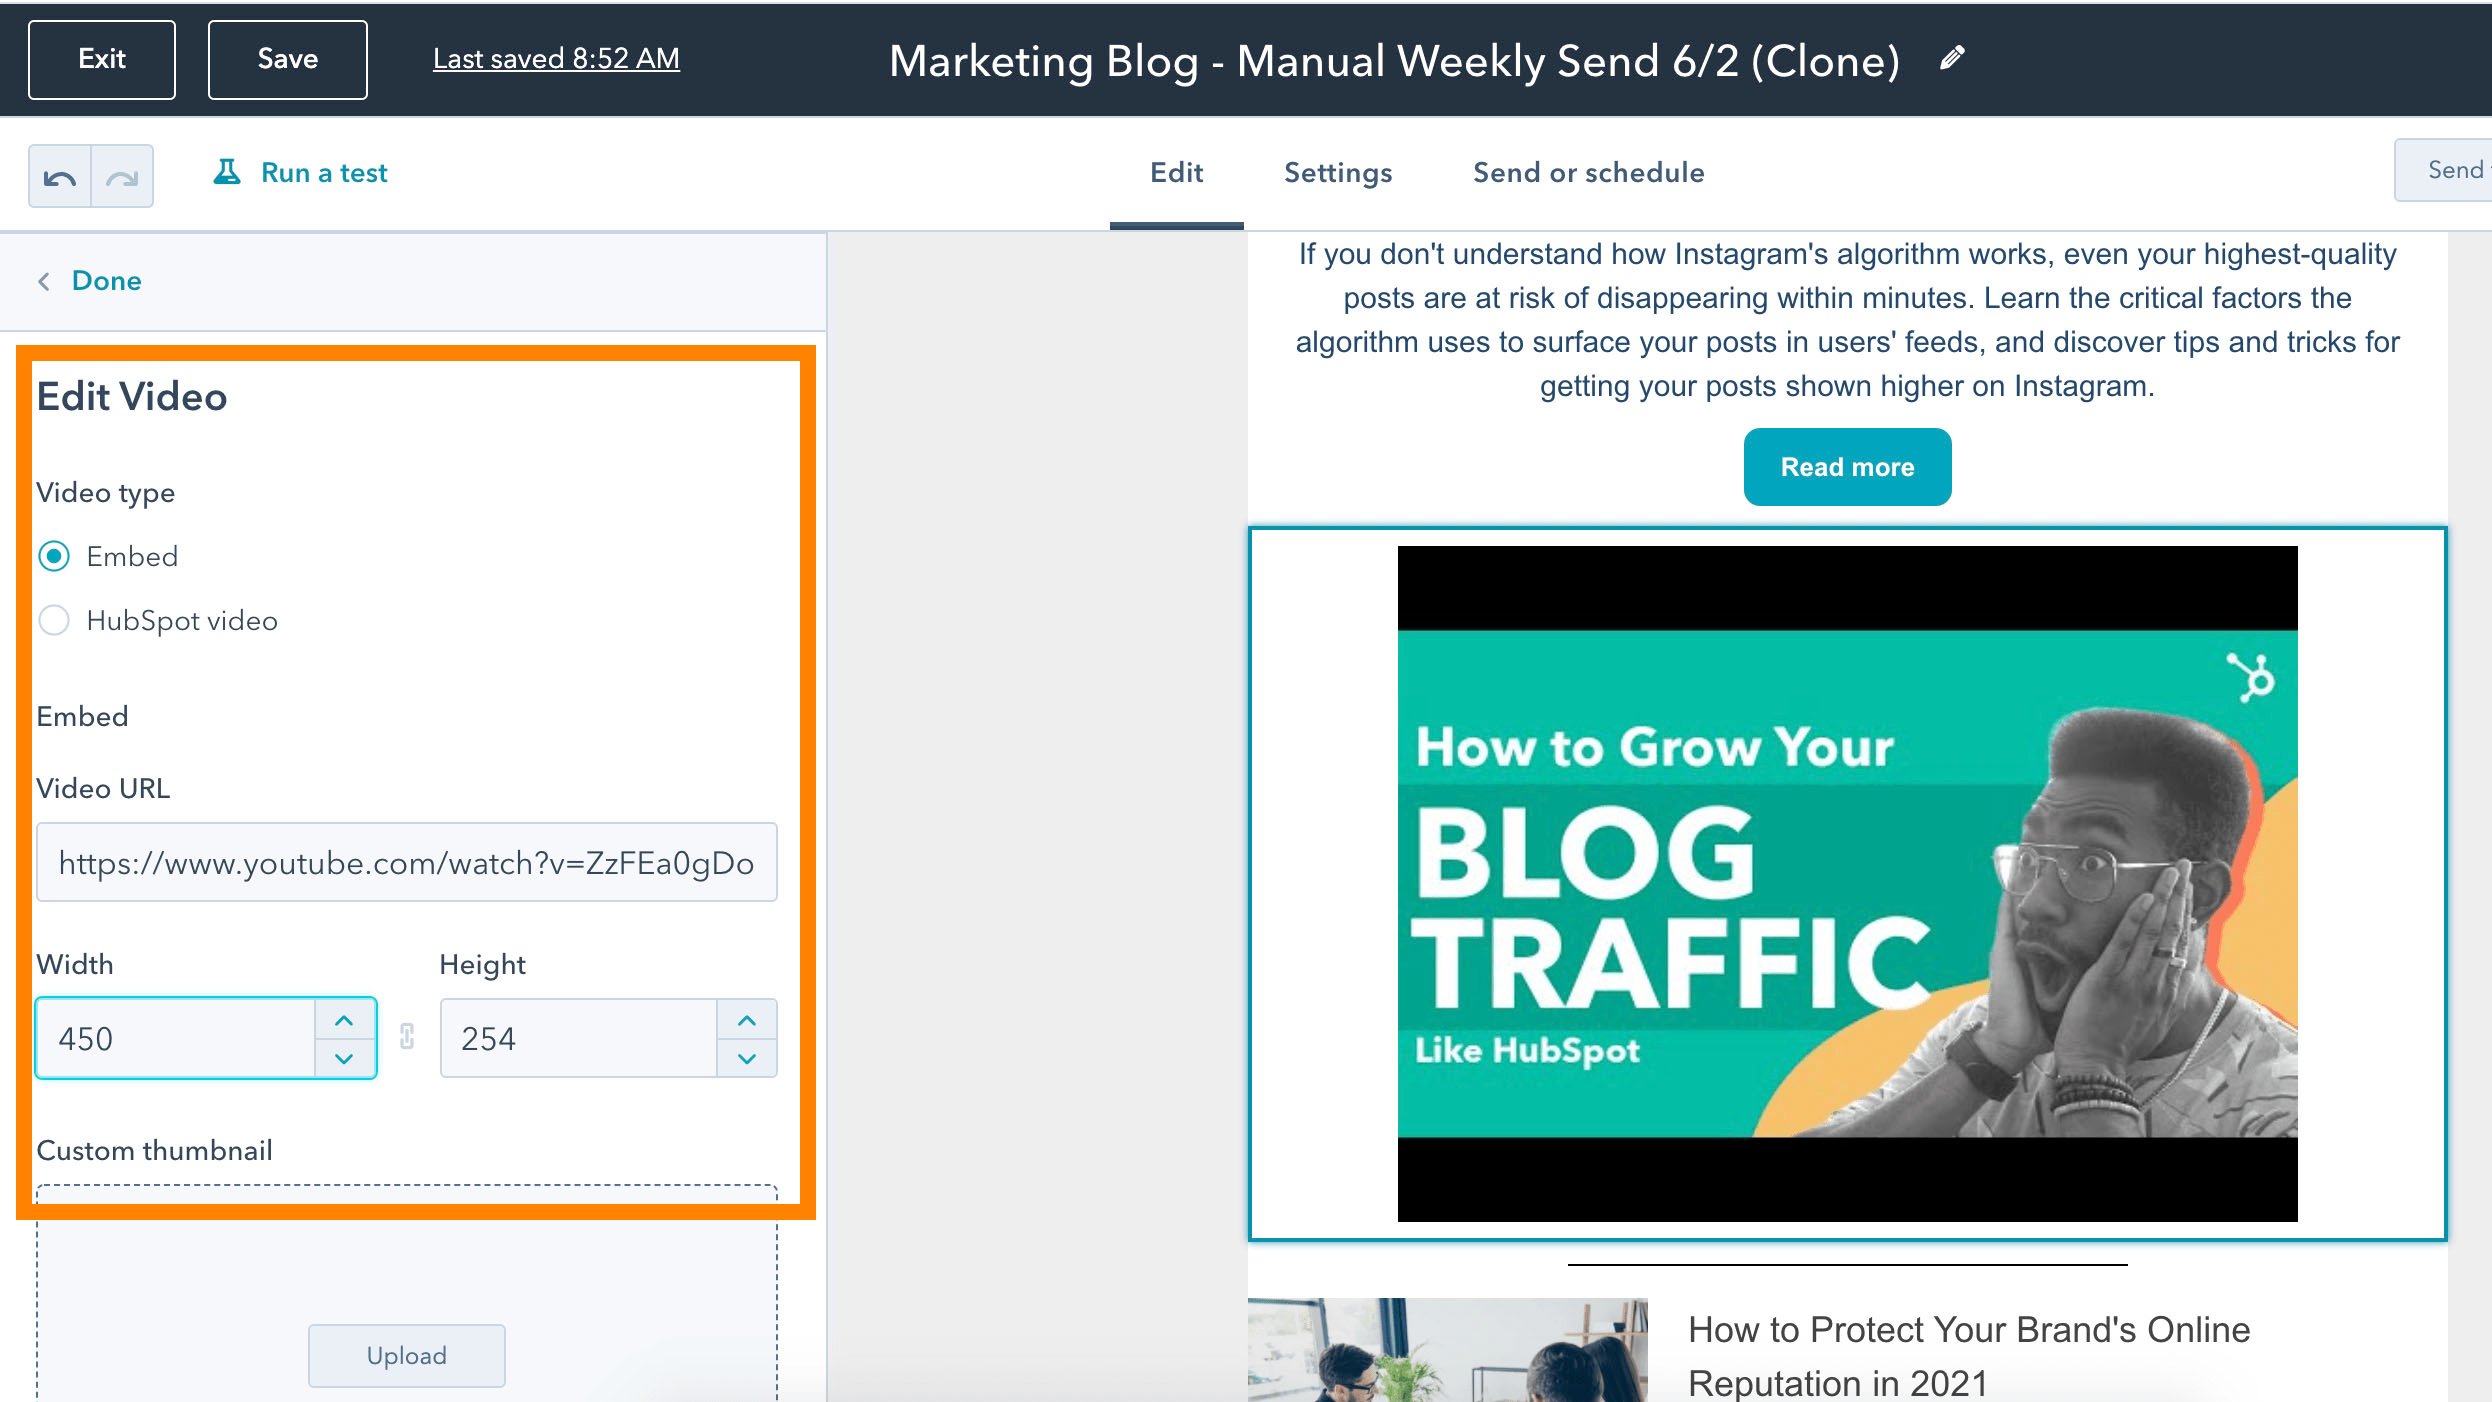 How to embed video in email Edit video through HubSpot email tools.